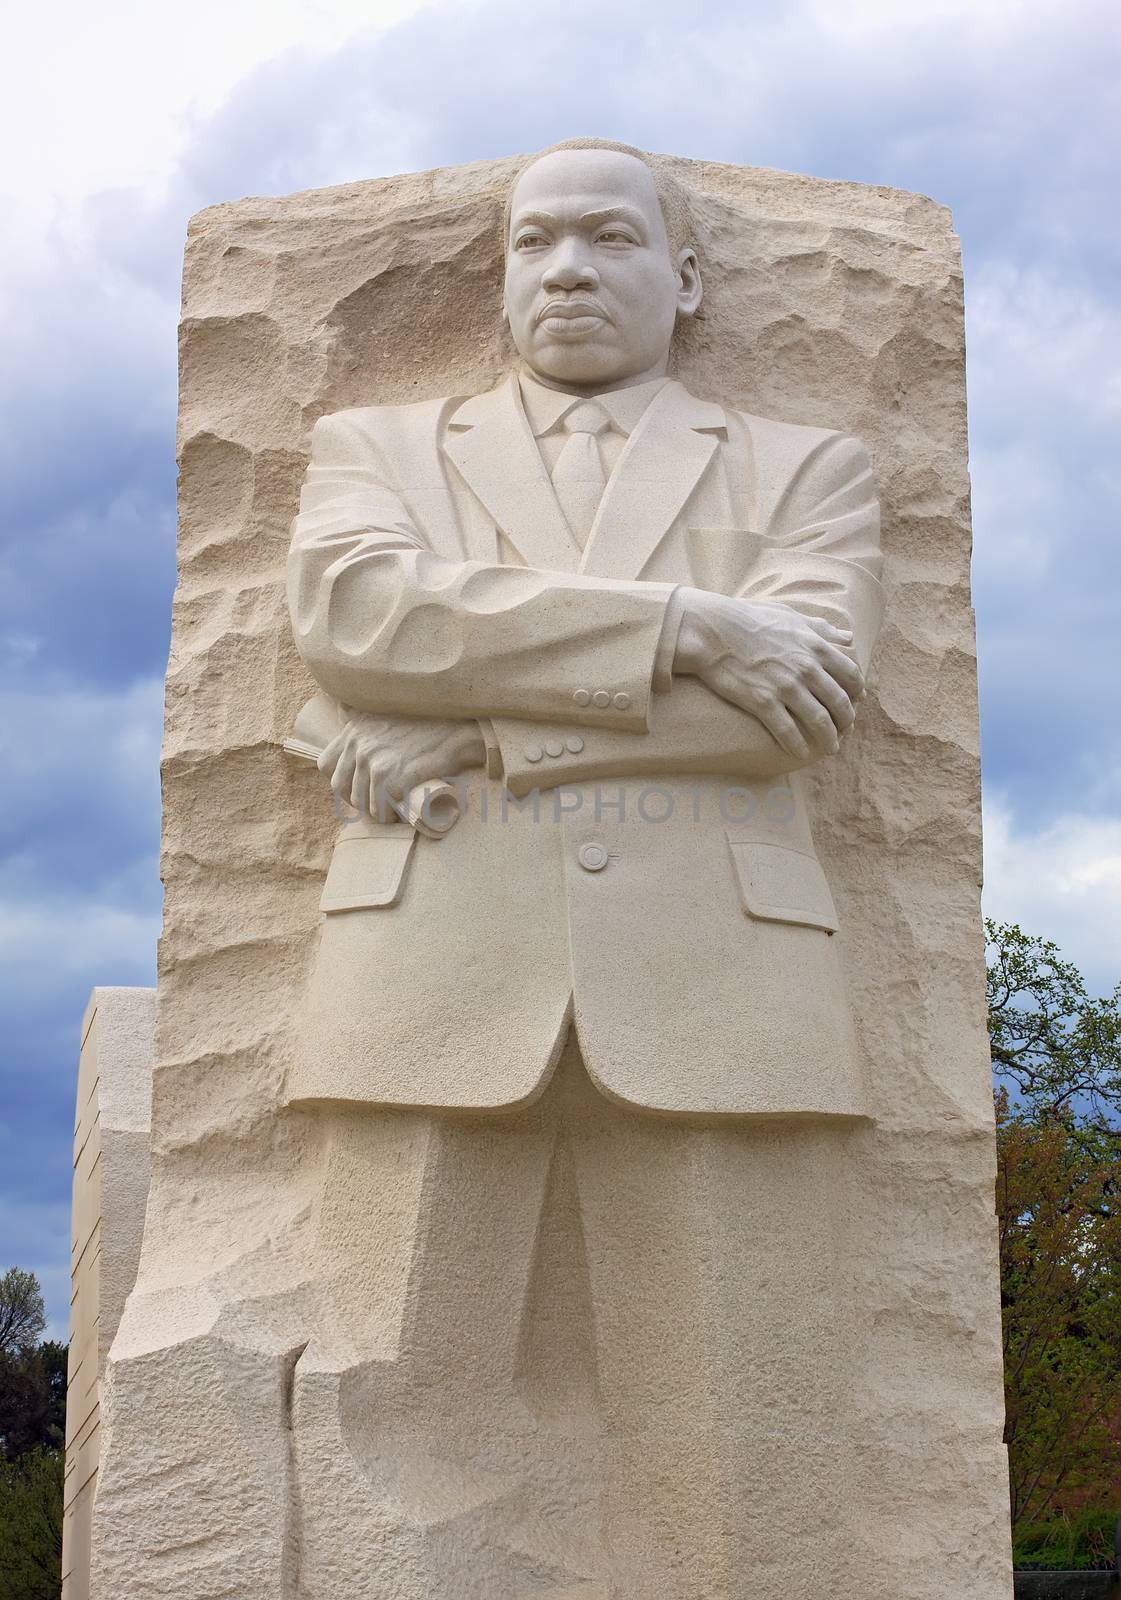 The Martin Luther King Memorial in Washington DC pays tribute to the slain civil rights leader near where he delivered his "I Have a Dream" speech.